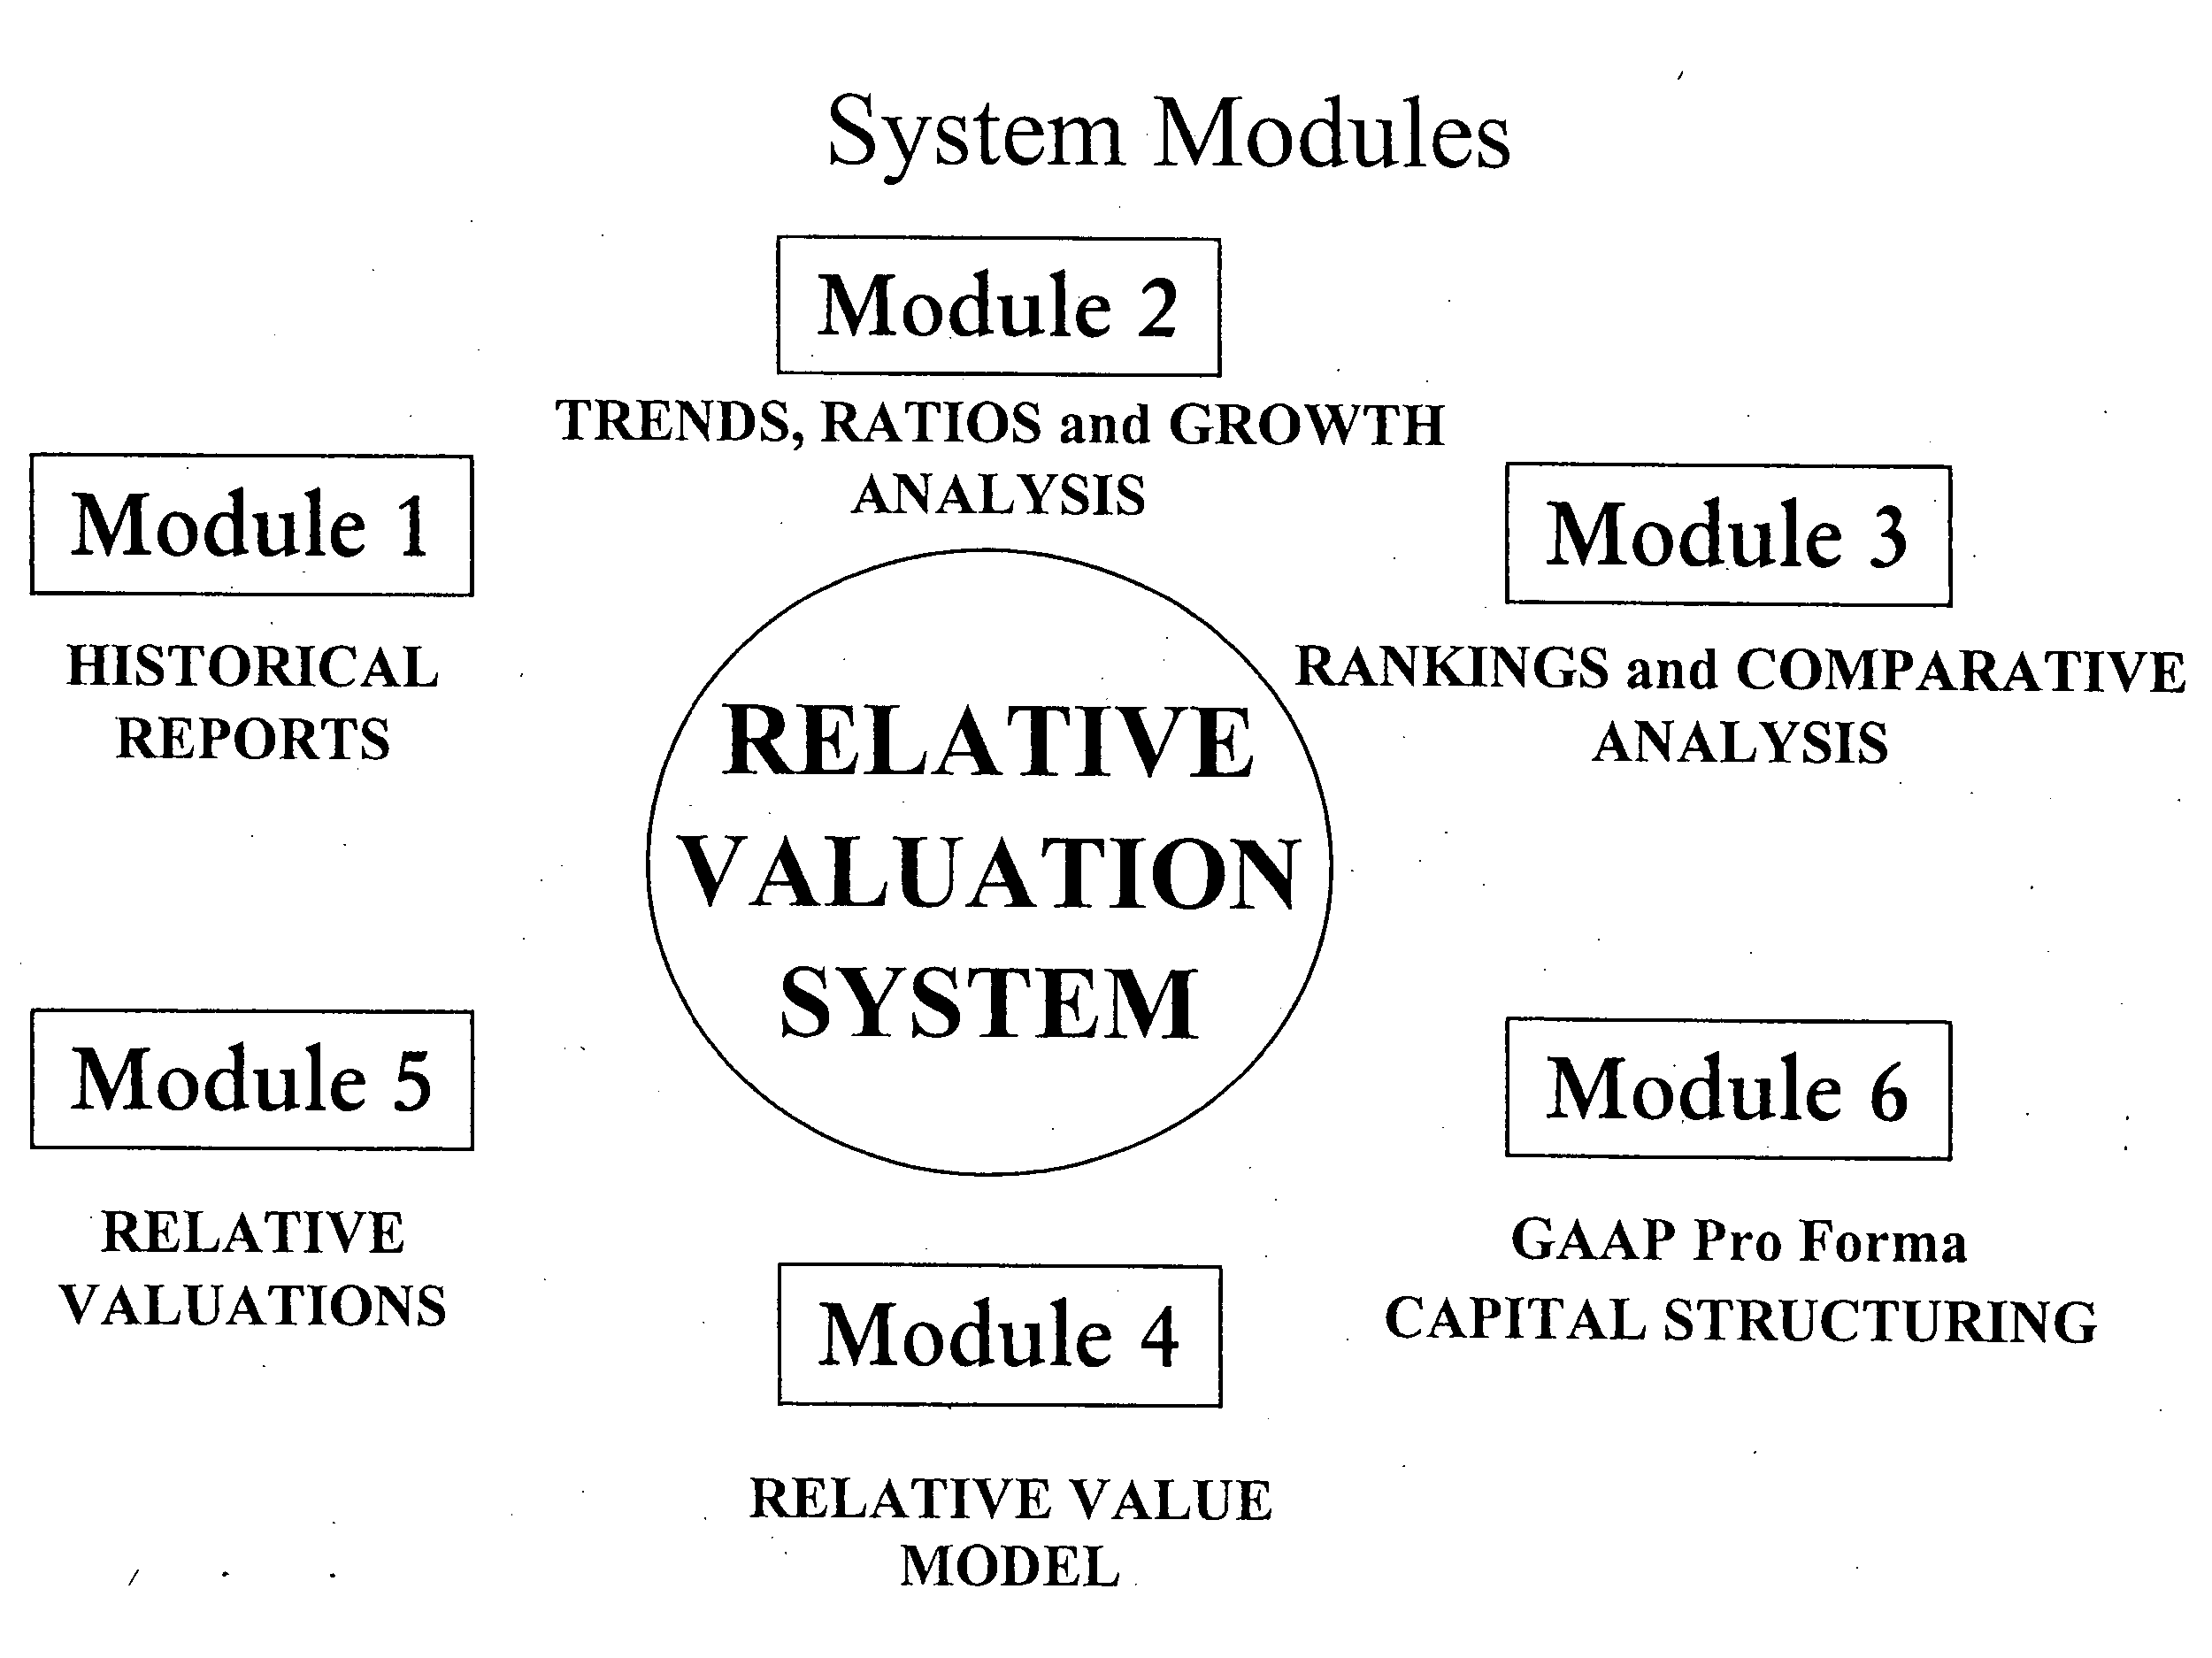 Relative valuation system for measuring the relative values, relative risks, and financial performance of corporate enterprises